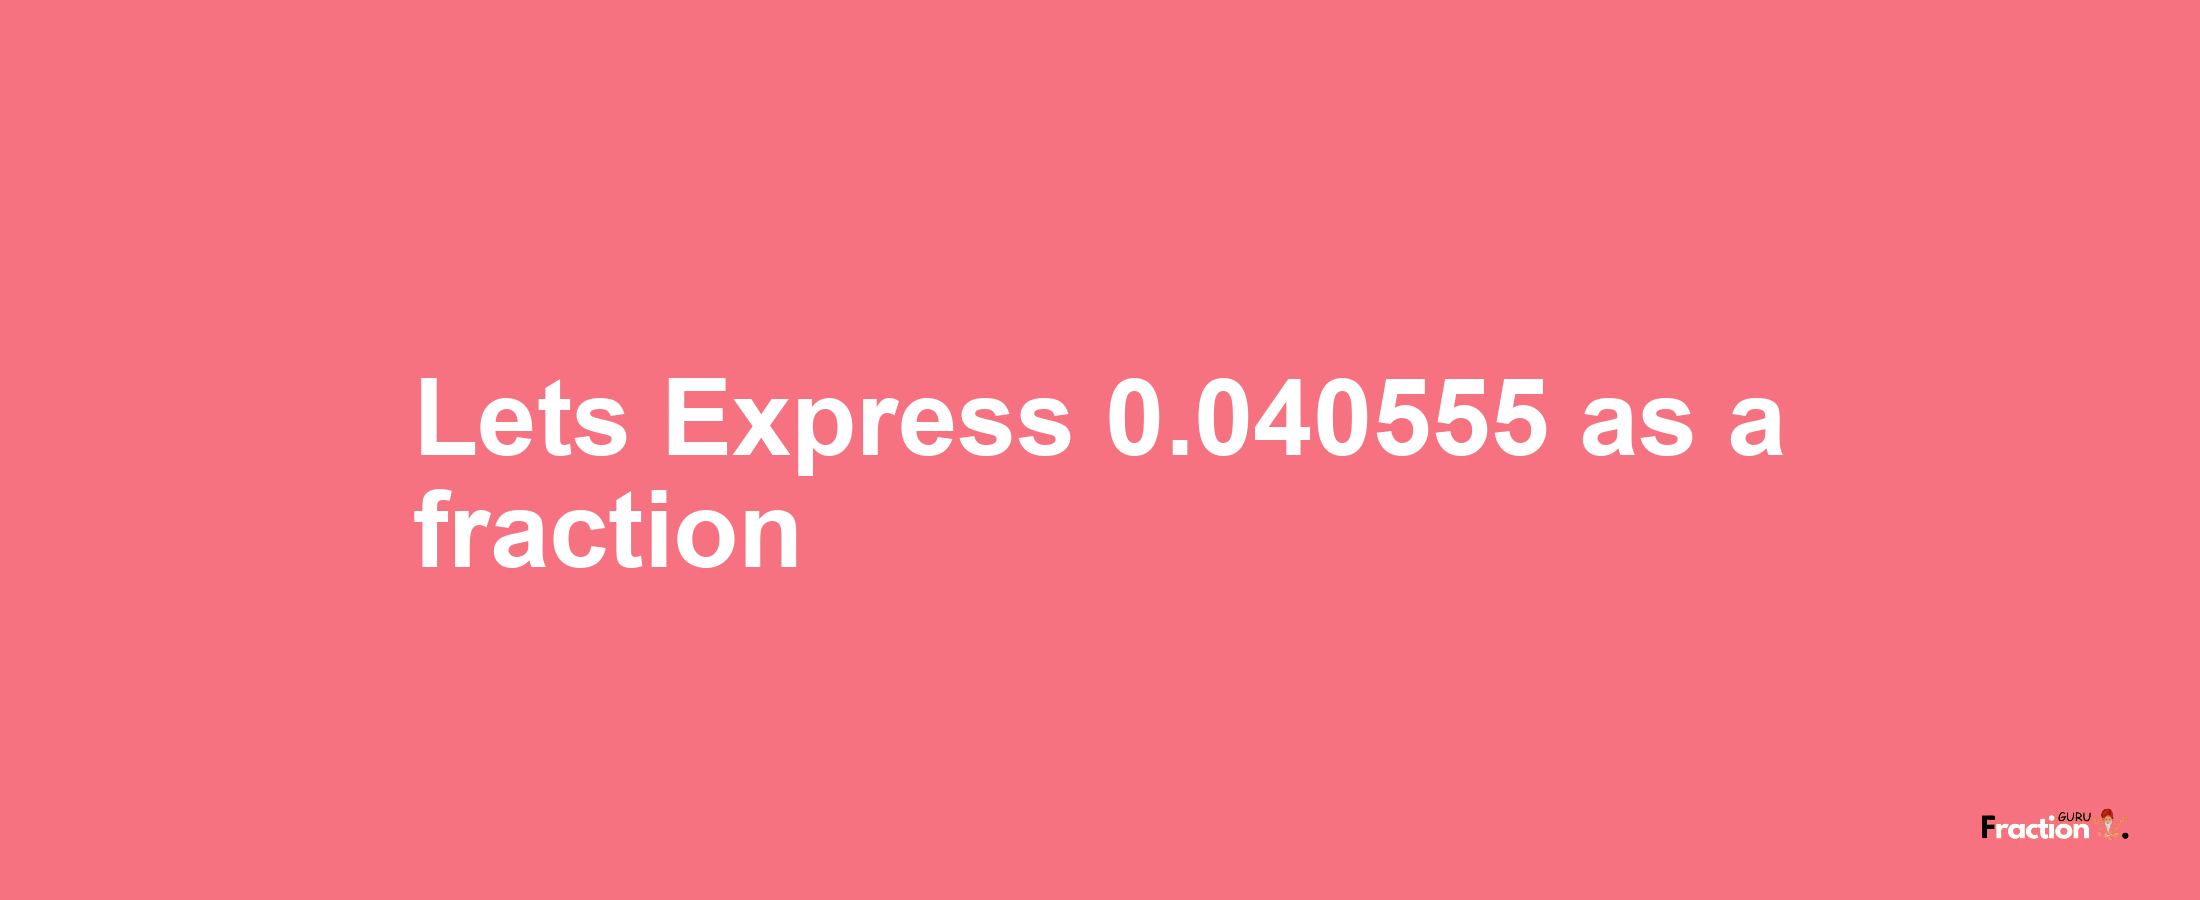 Lets Express 0.040555 as afraction